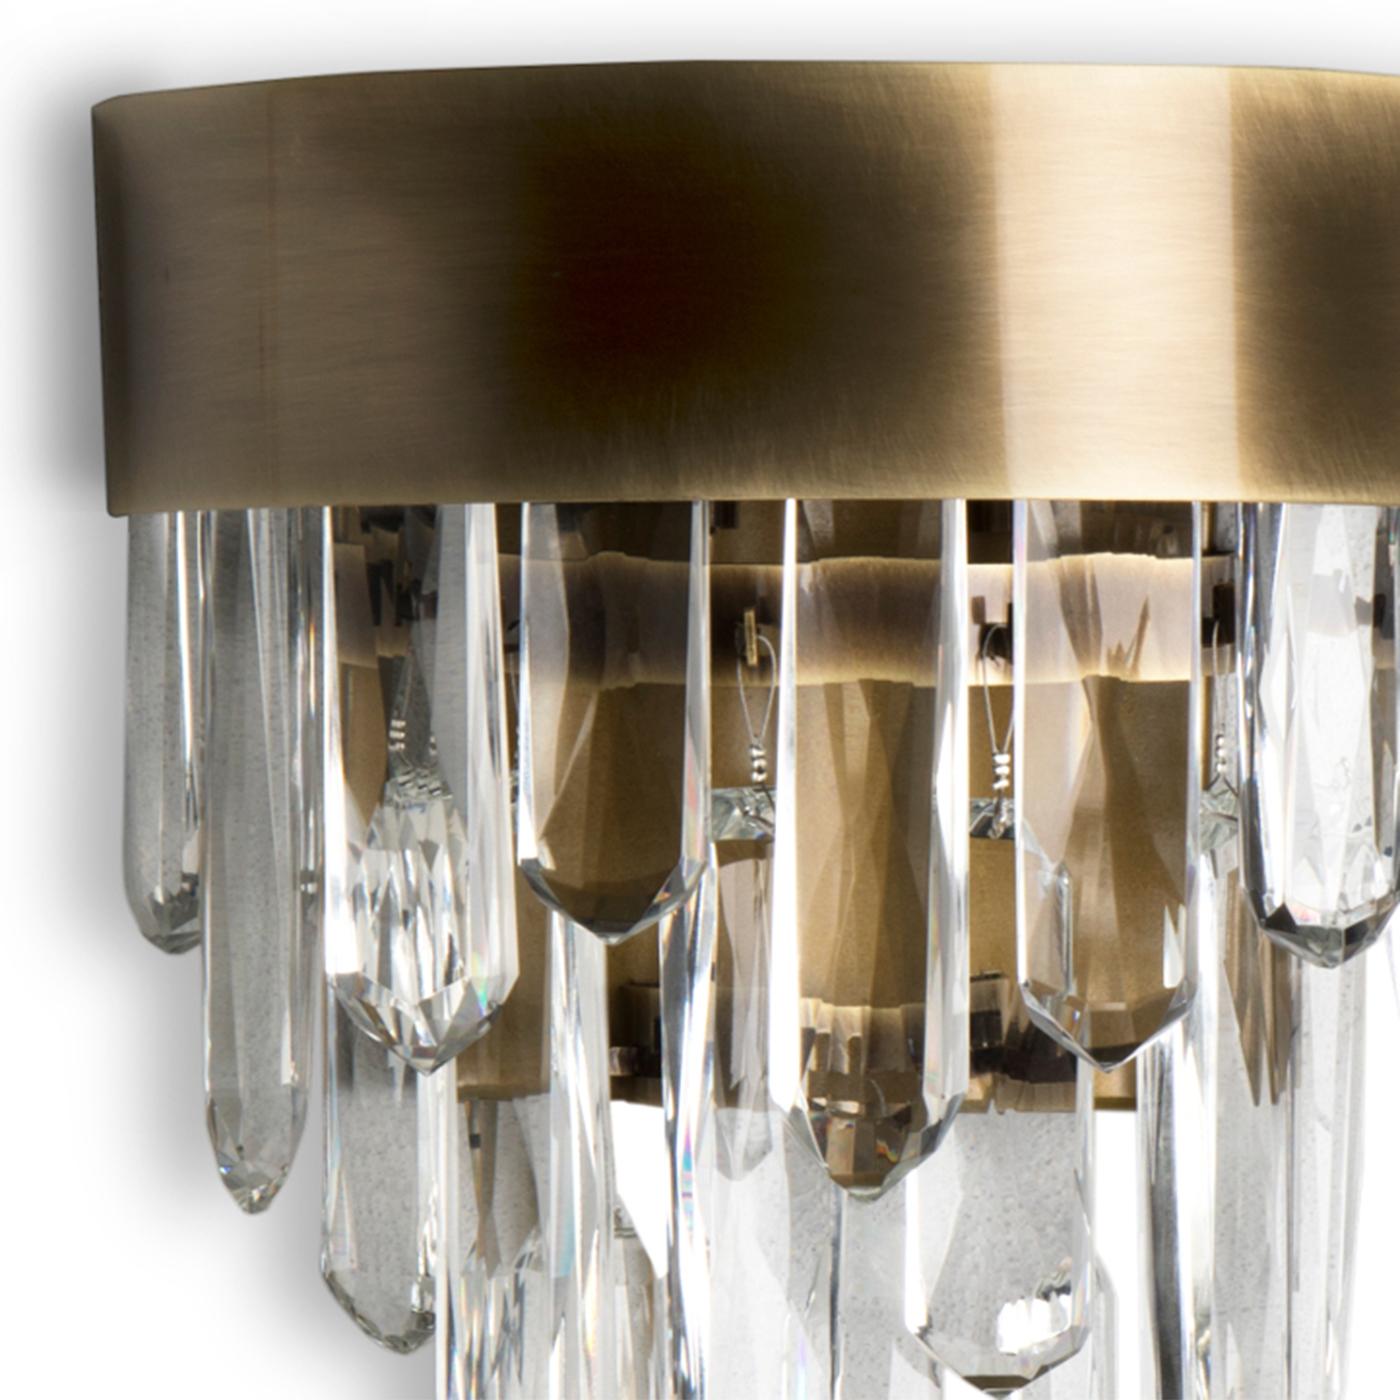 Wall lamp crystal sticks with carved quartz
crystal sticks. Structure in solid brass in antique brushed
finish. With led light inside the half ring structure.
Also available in single or triple ring crystal sticks chandelier
and crystal sticks